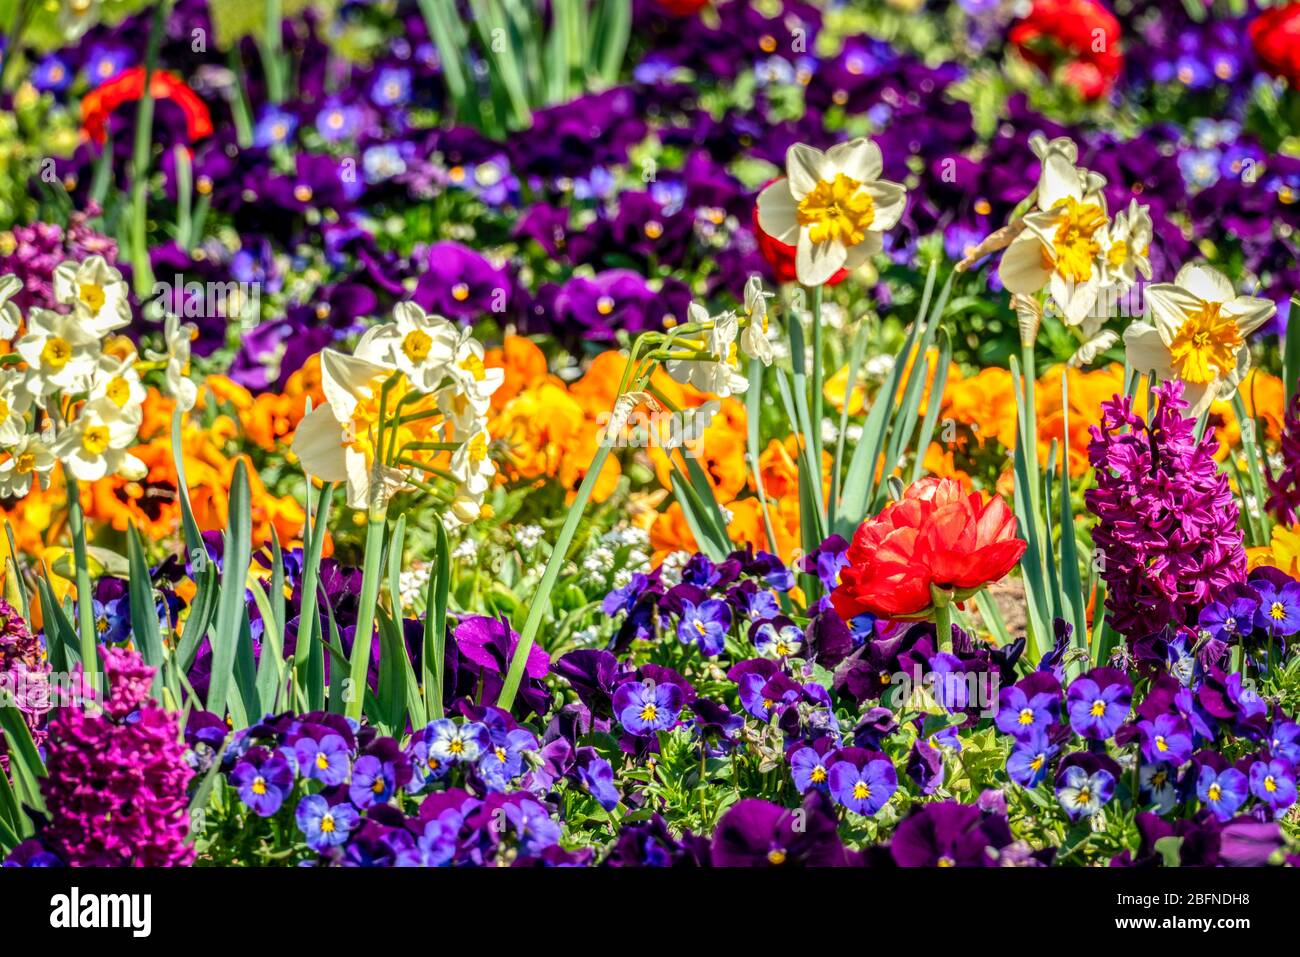 Very colorful spring flower bed with daffodils, pansies, buttercups and hyacinths Stock Photo